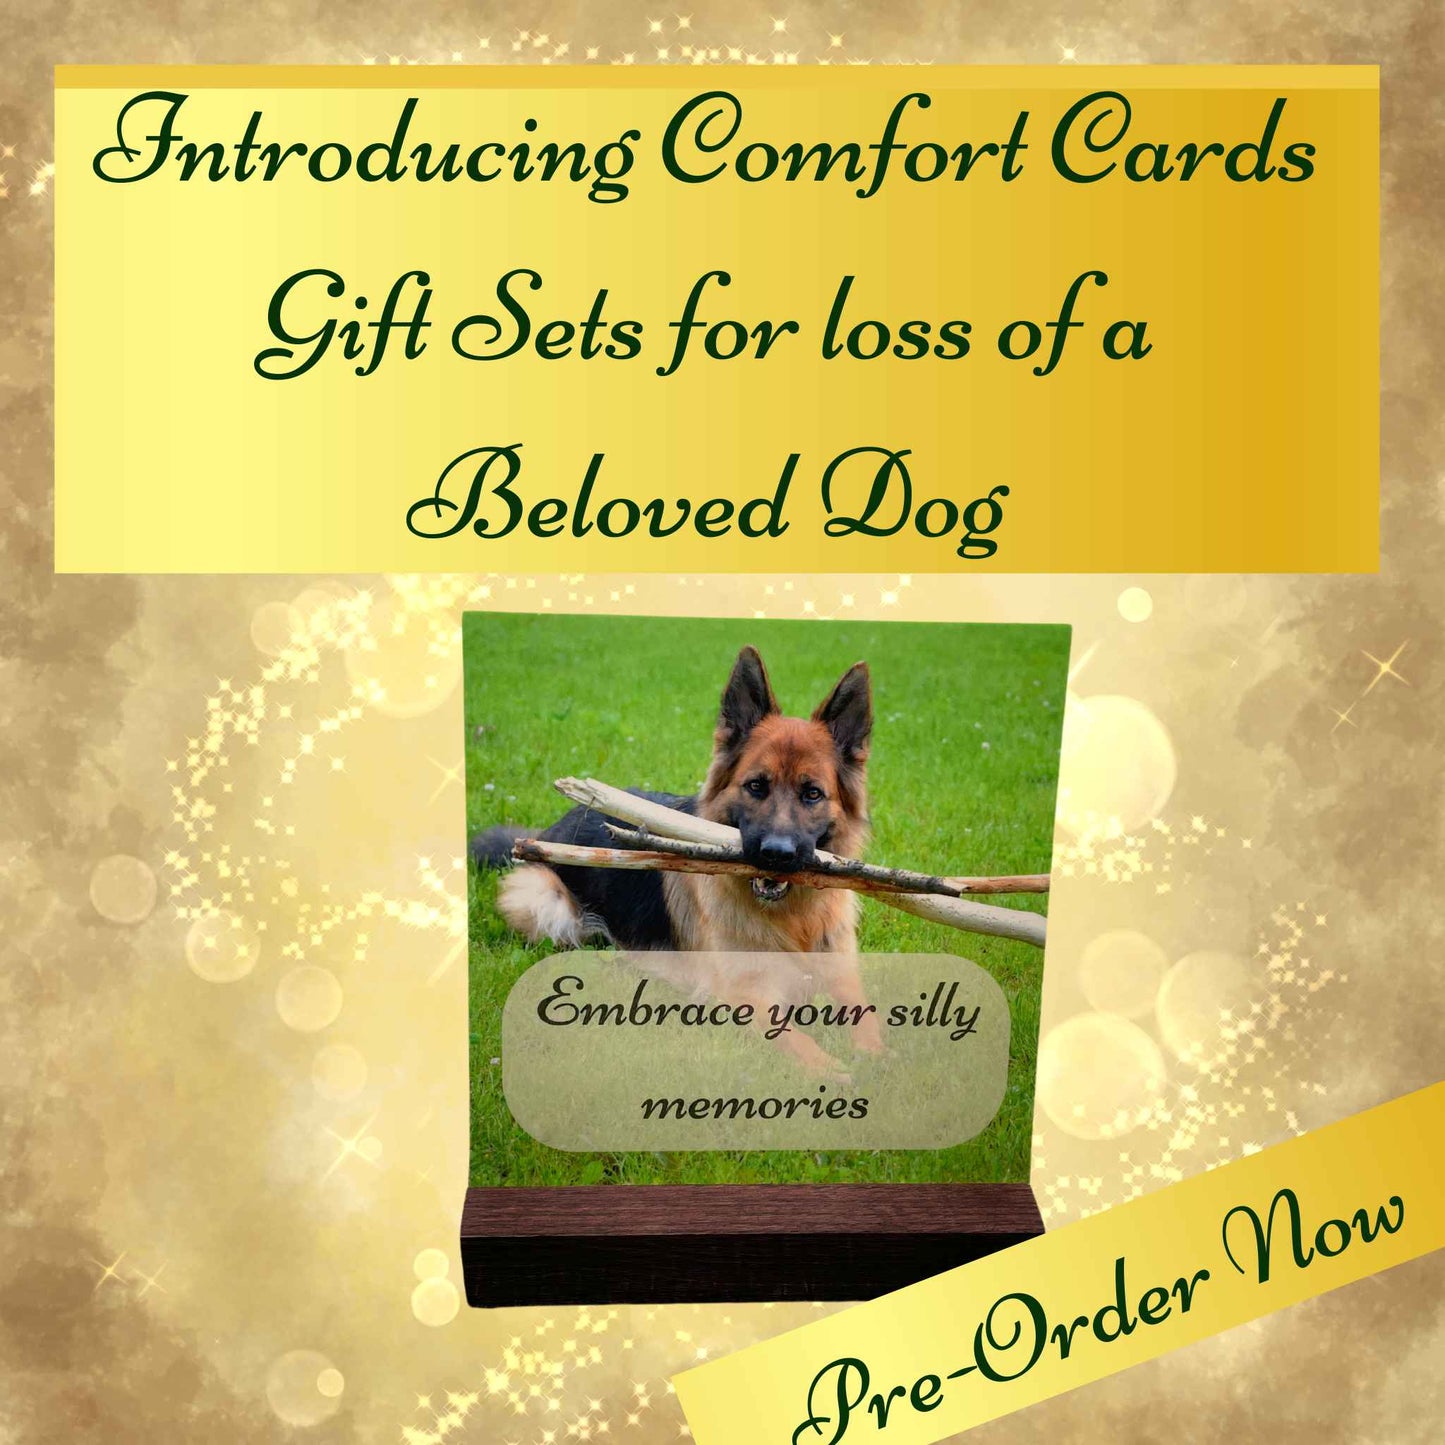 WHOLESALE Comfort Card Gift Sets for the Loss of a Beloved Dog (6 Units)